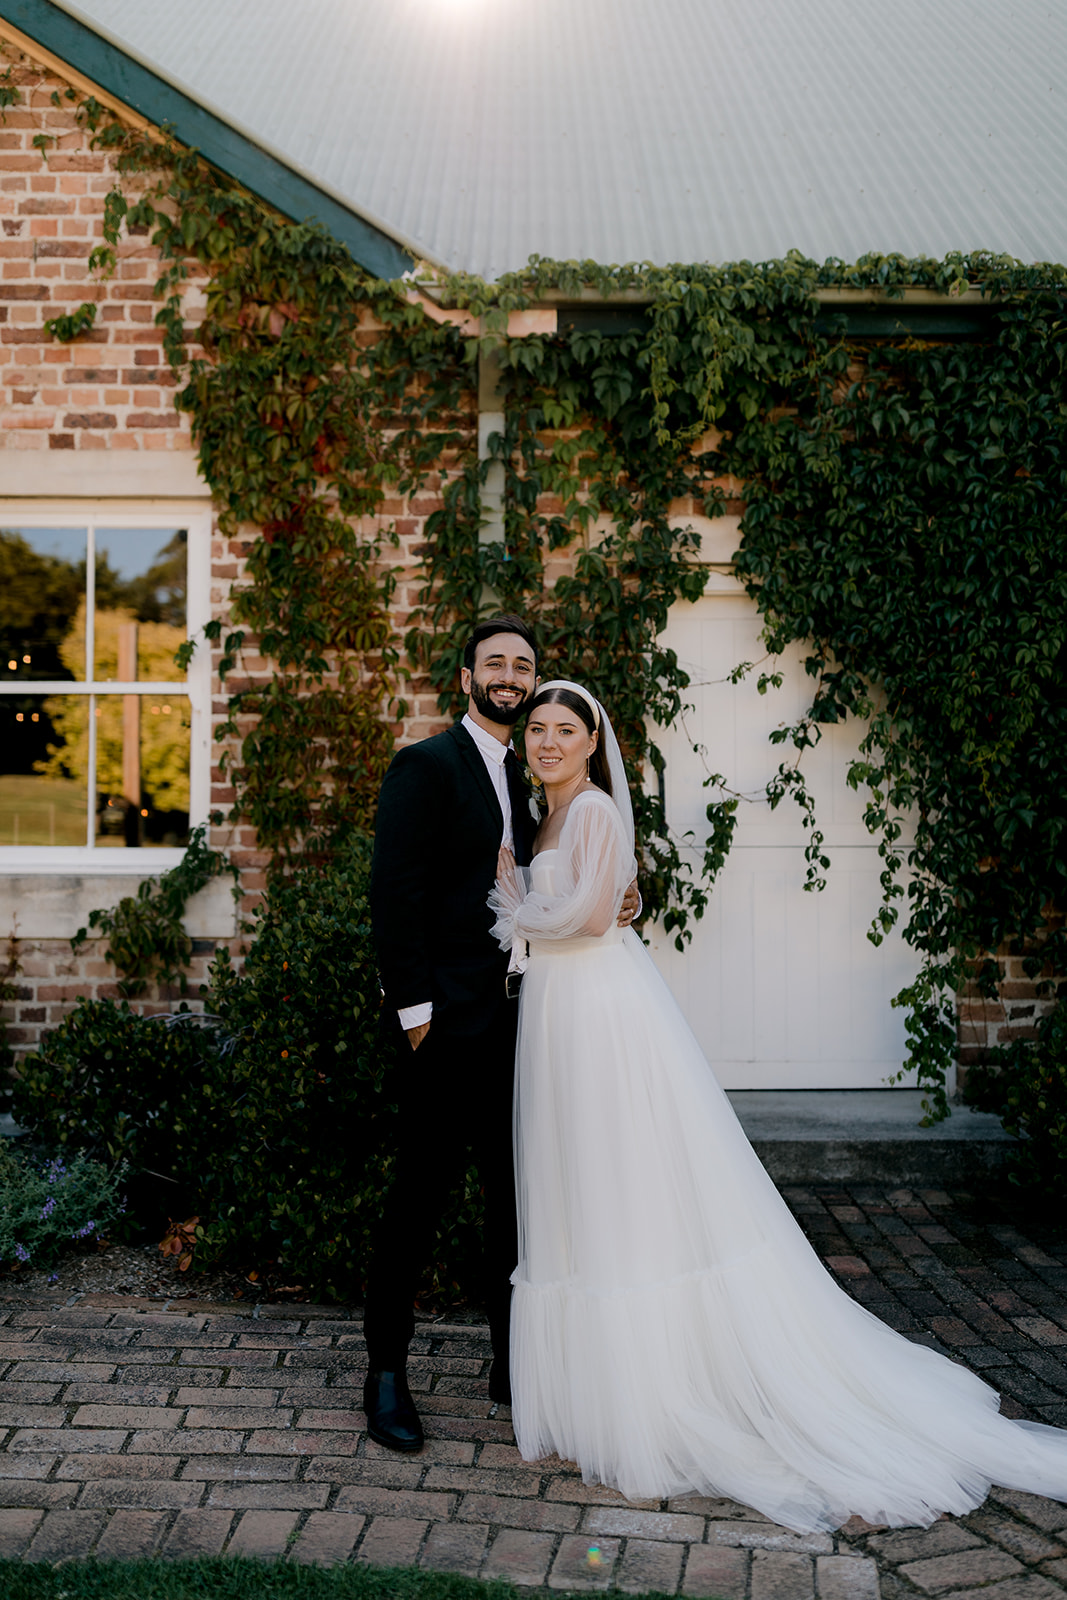 Portrait of bride & groom in front of heritage venue at their elegant country wedding.